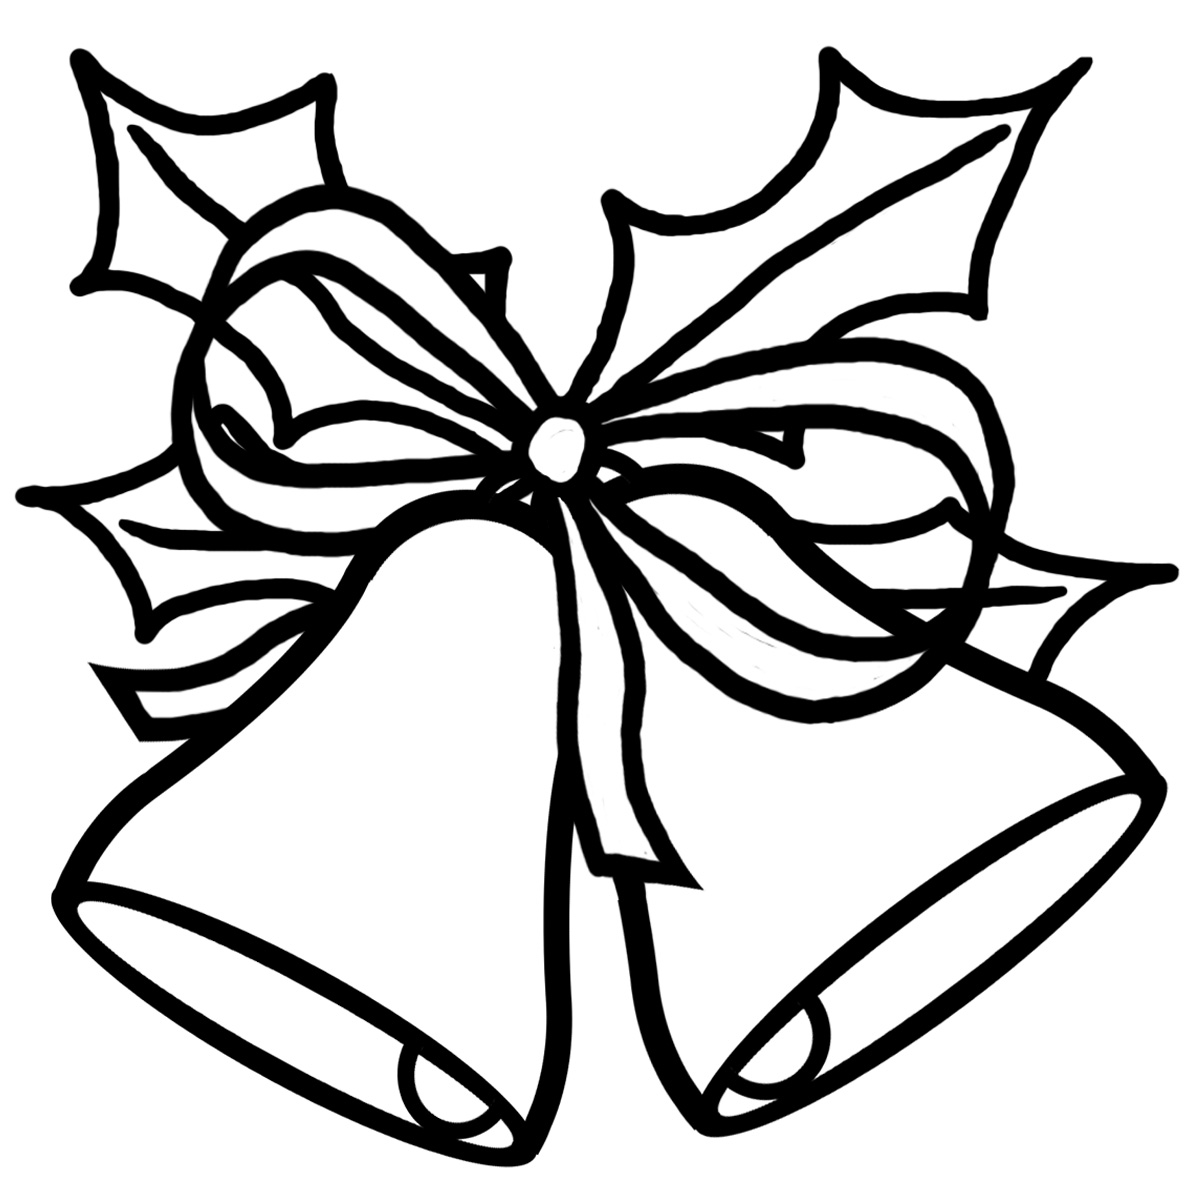 Black and white christmas pictures clipart